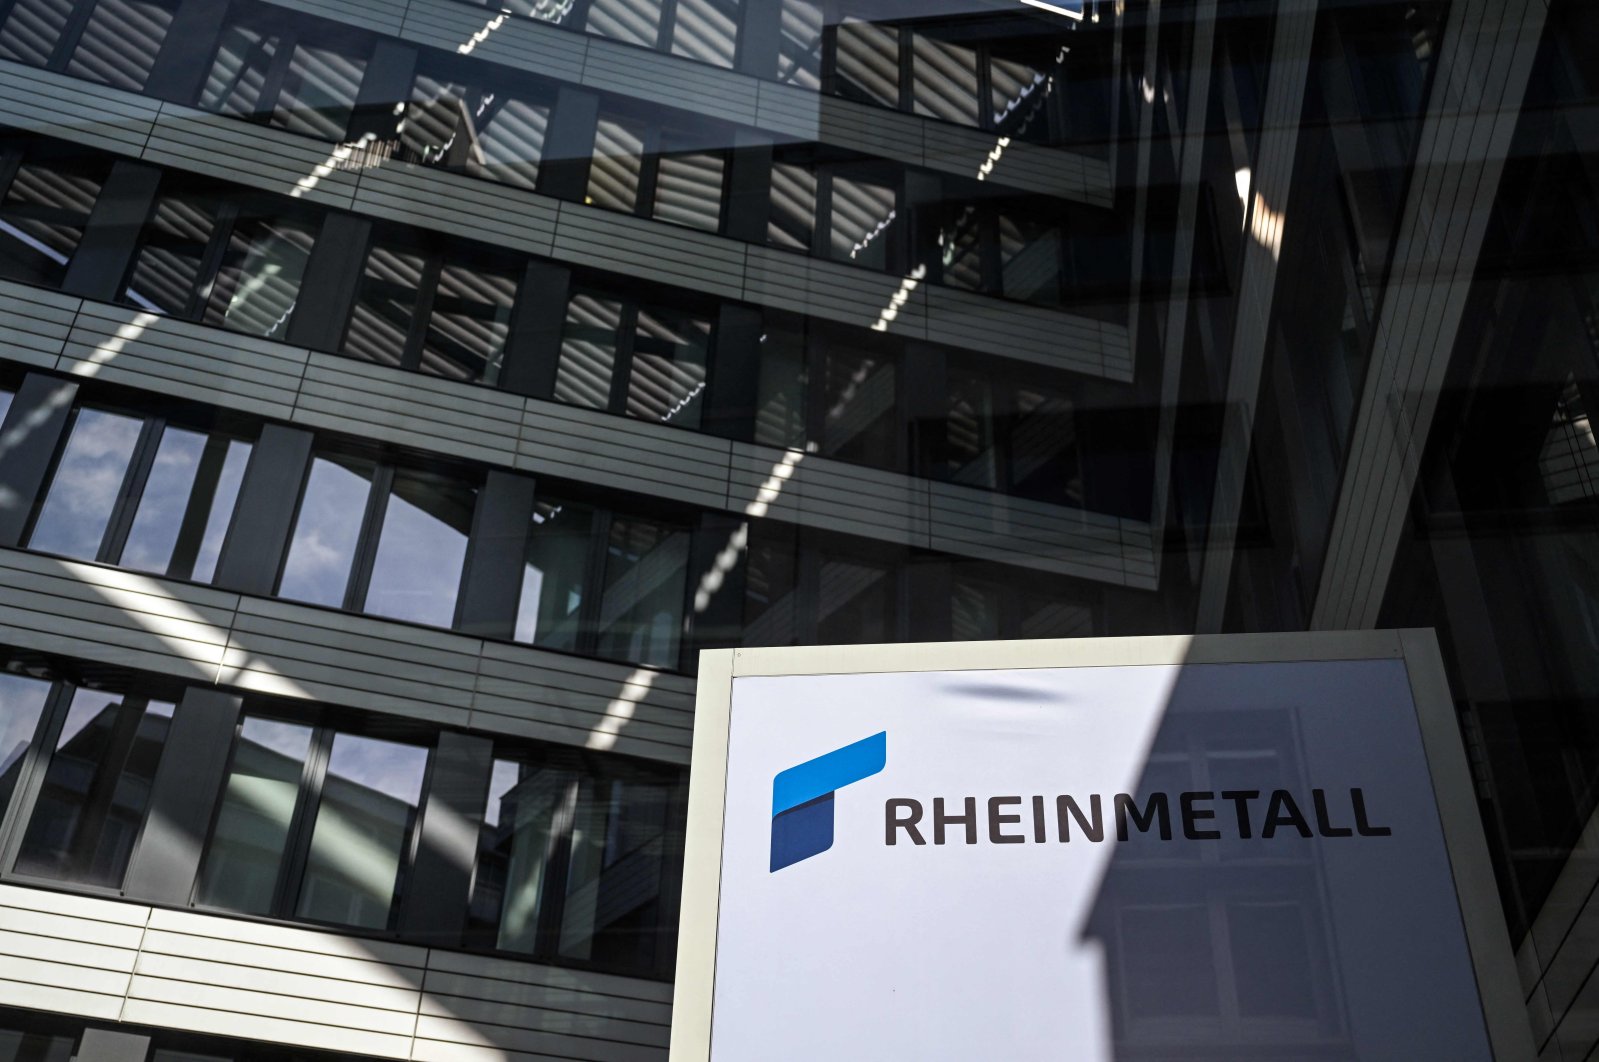 The logo of German defense company and automotive supplier Rheinmetall is seen at their headquarters in Duesseldorf, western Germany, April 21, 2022. (AFP Photo)